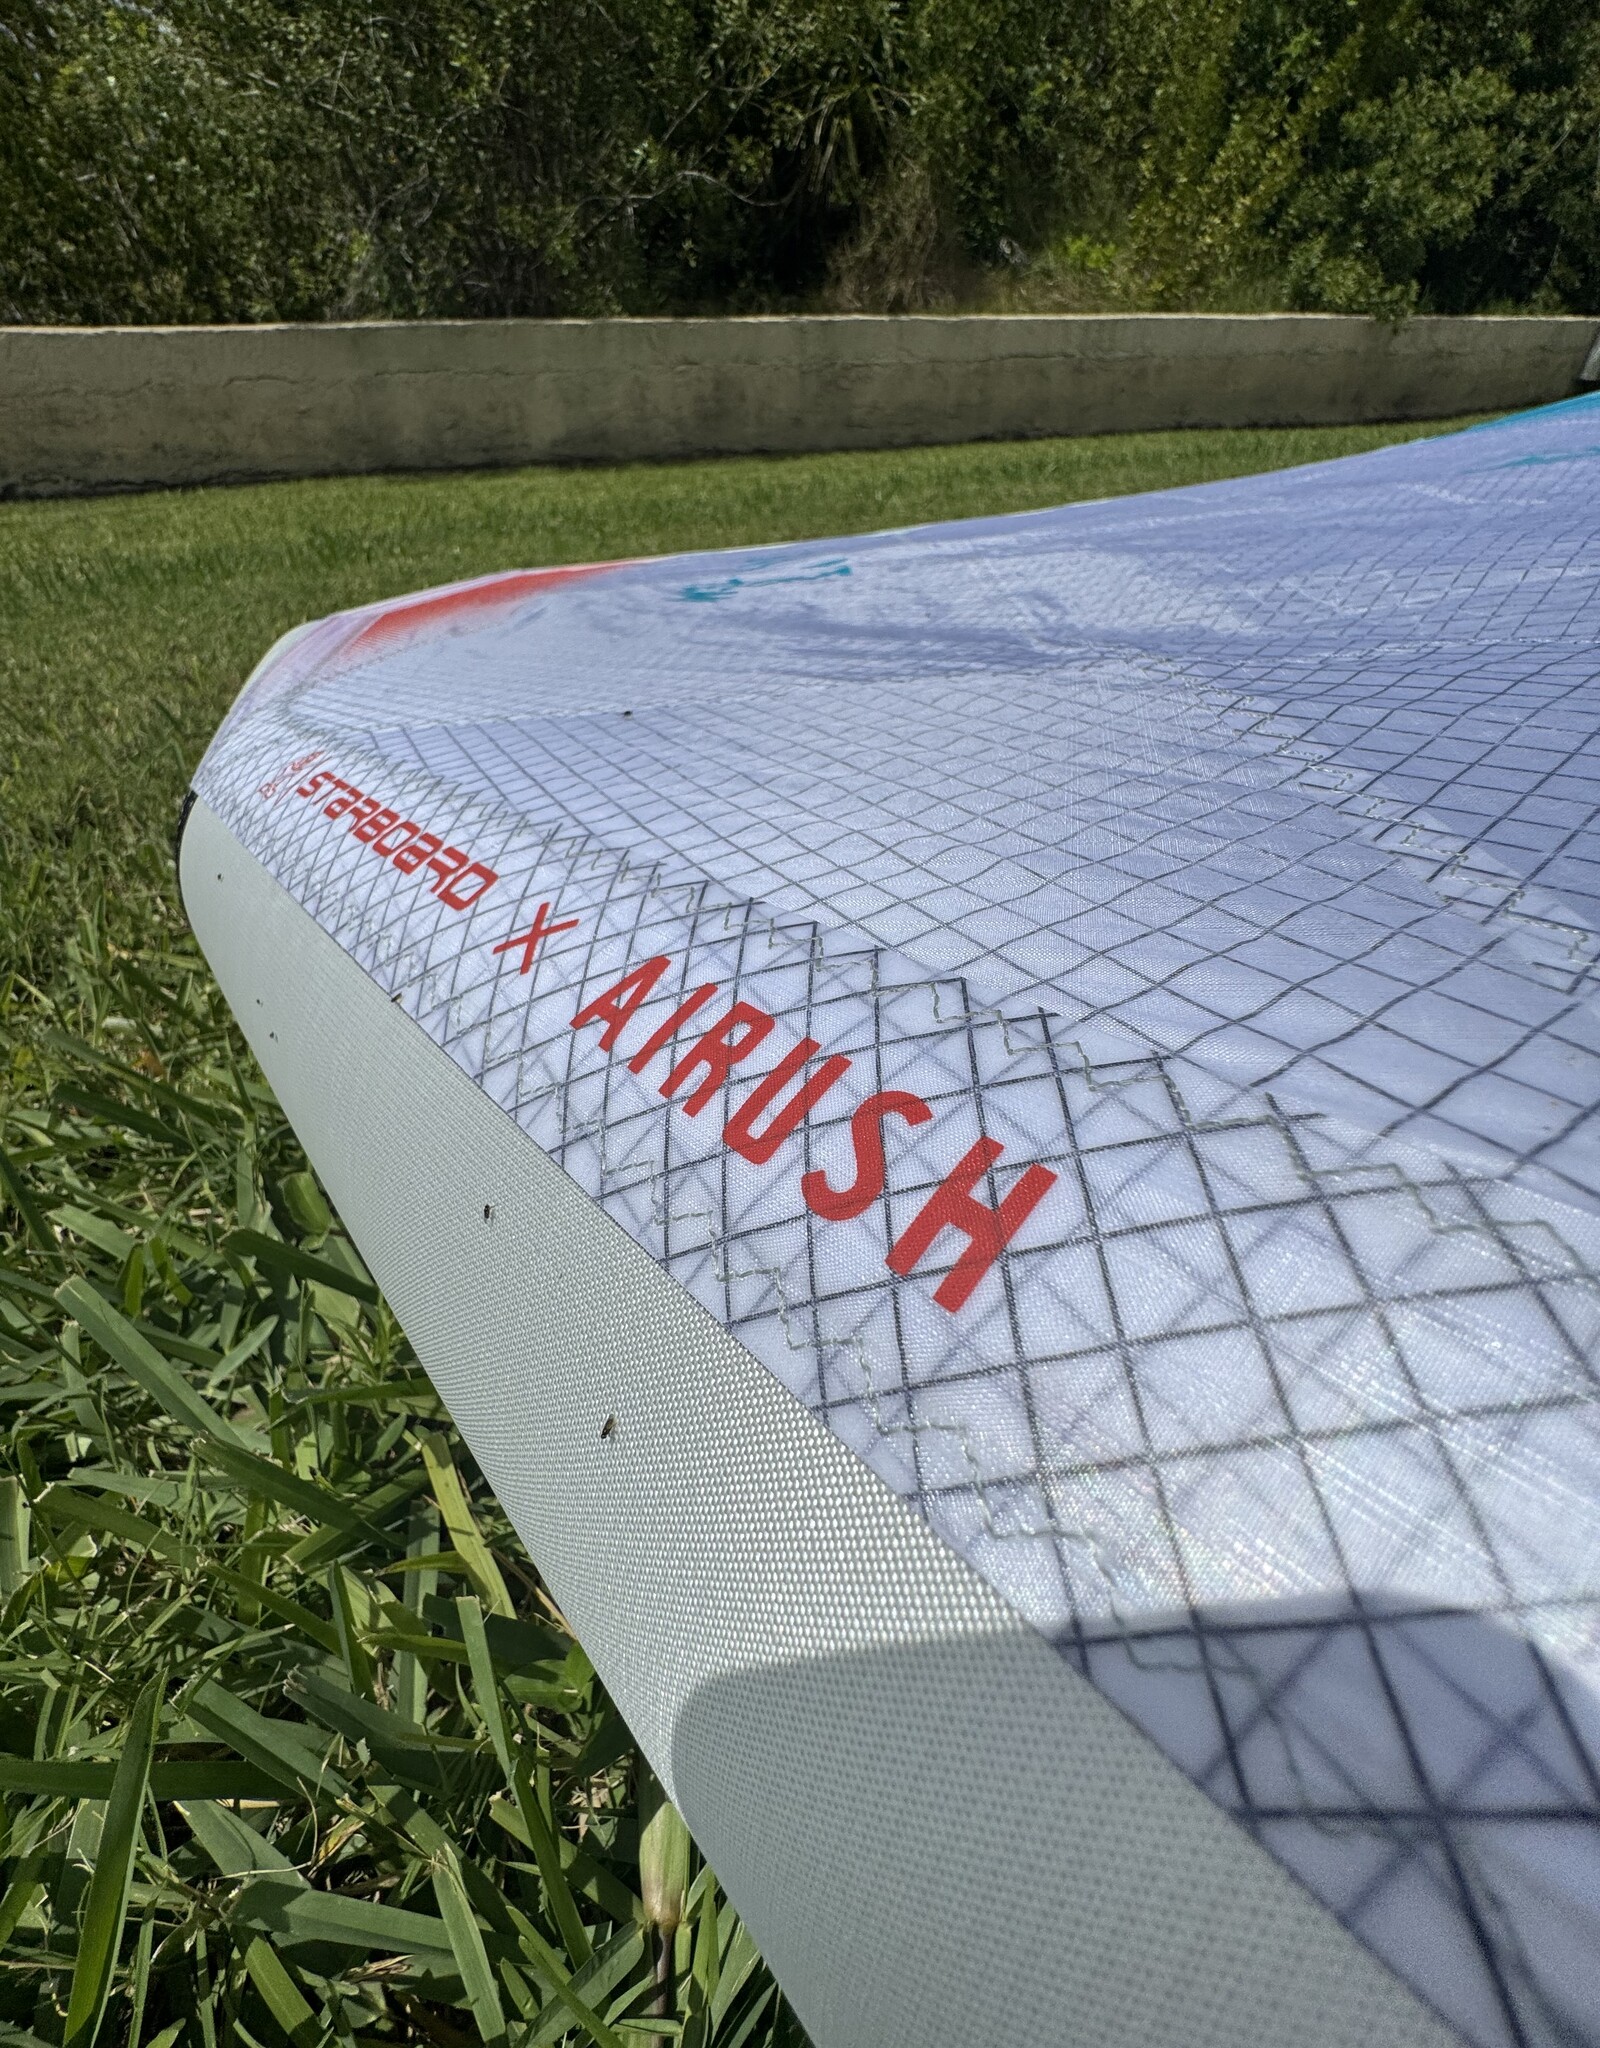 FREEWING FREEWING AIR TEAM 4.5M ULTRA X CANOPY AND HO'OKIPA AIRFRAME